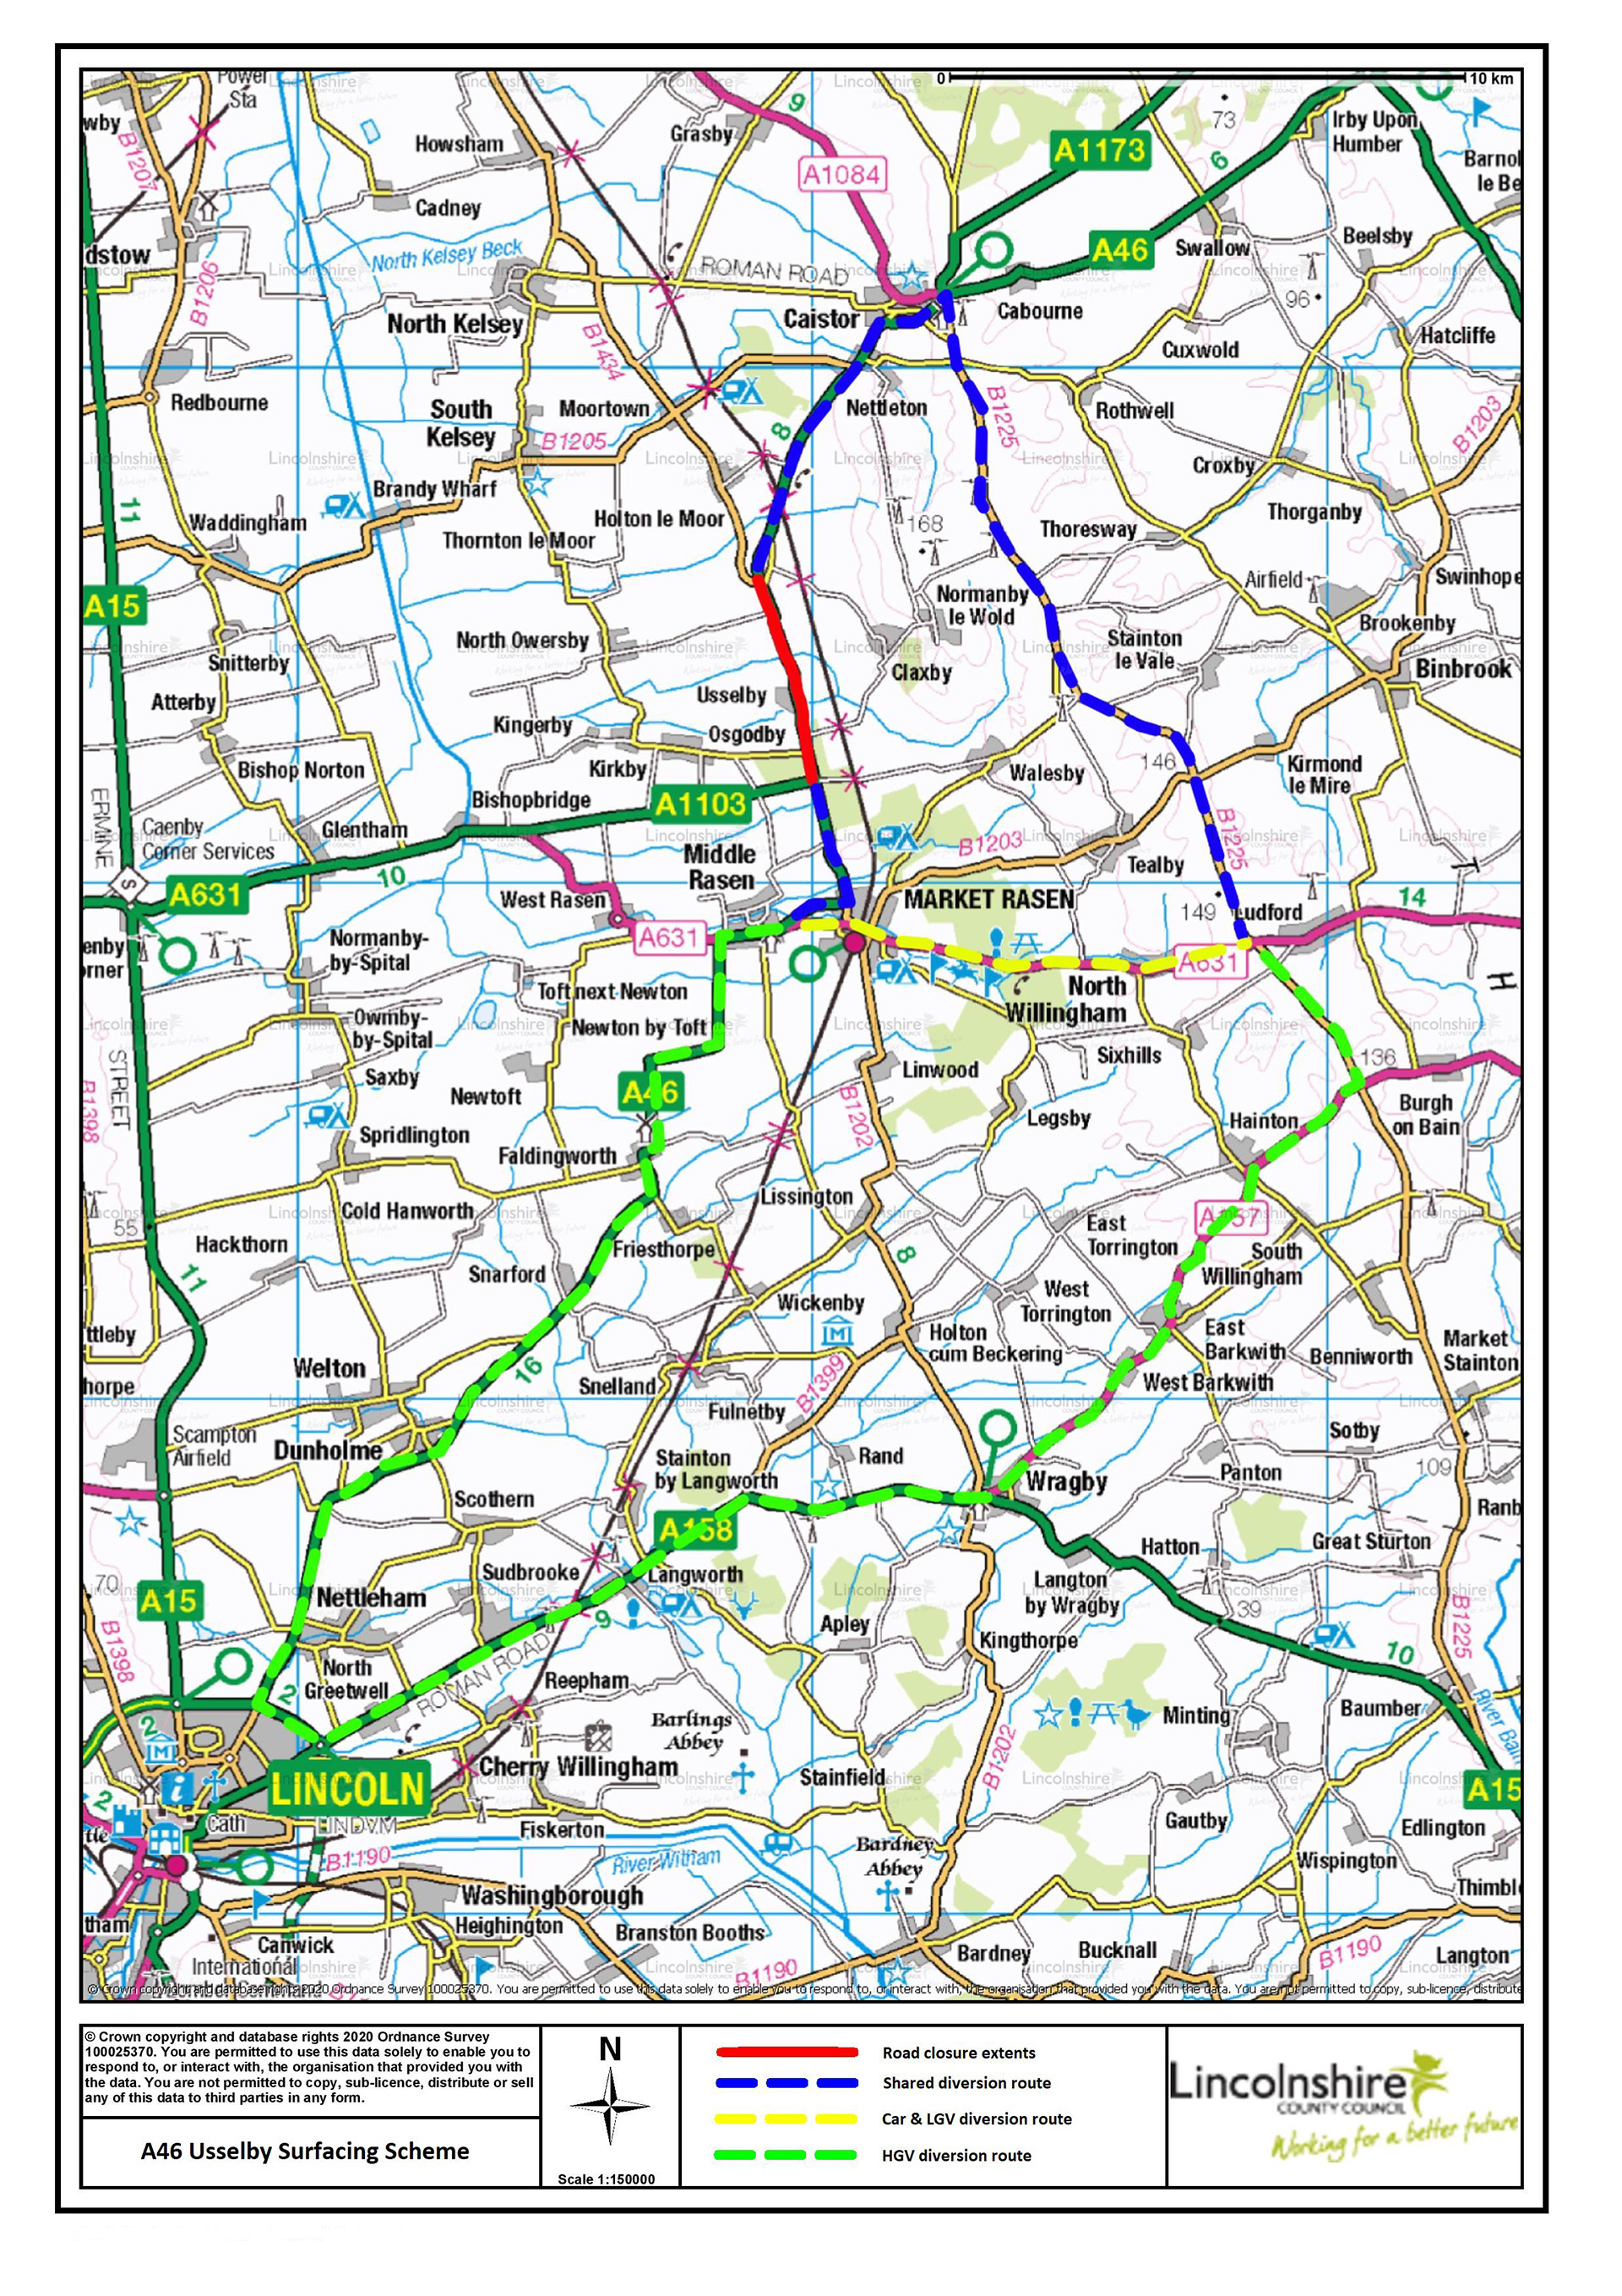 Diversion route a46 usselby full